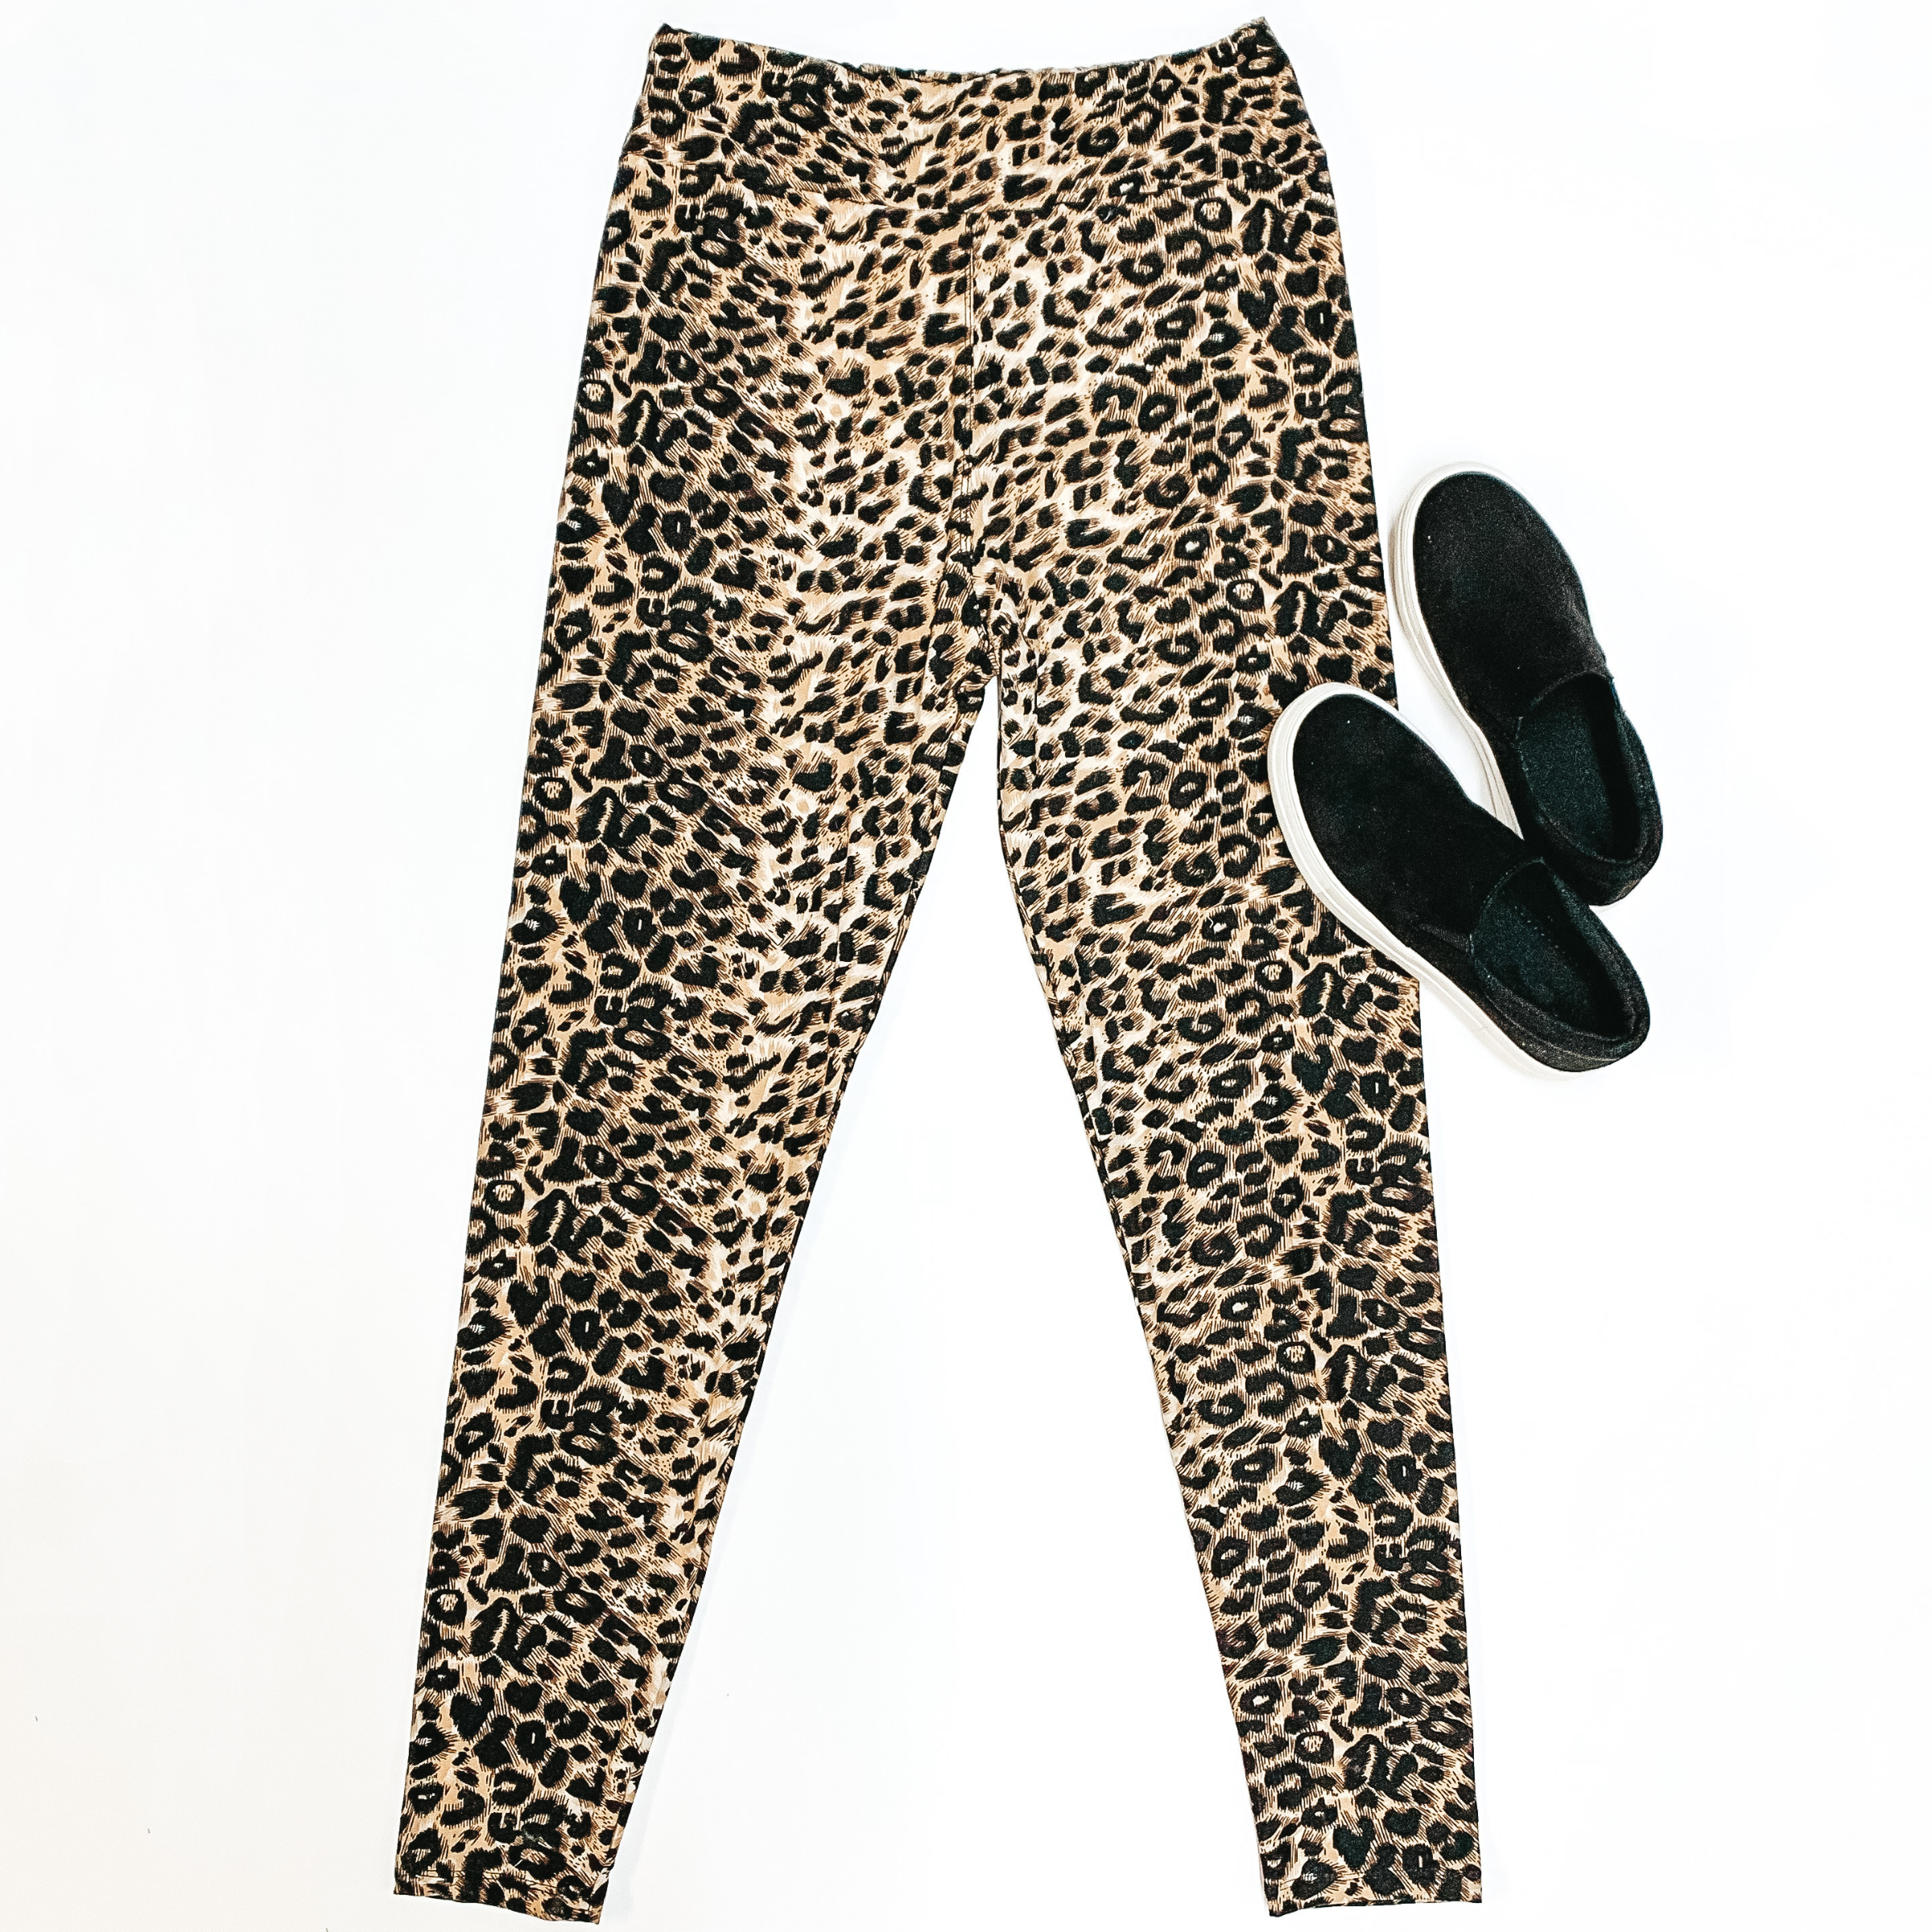 Plus Sizes | Quick Fix Wide Band Leopard Print Leggings - Giddy Up Glamour Boutique